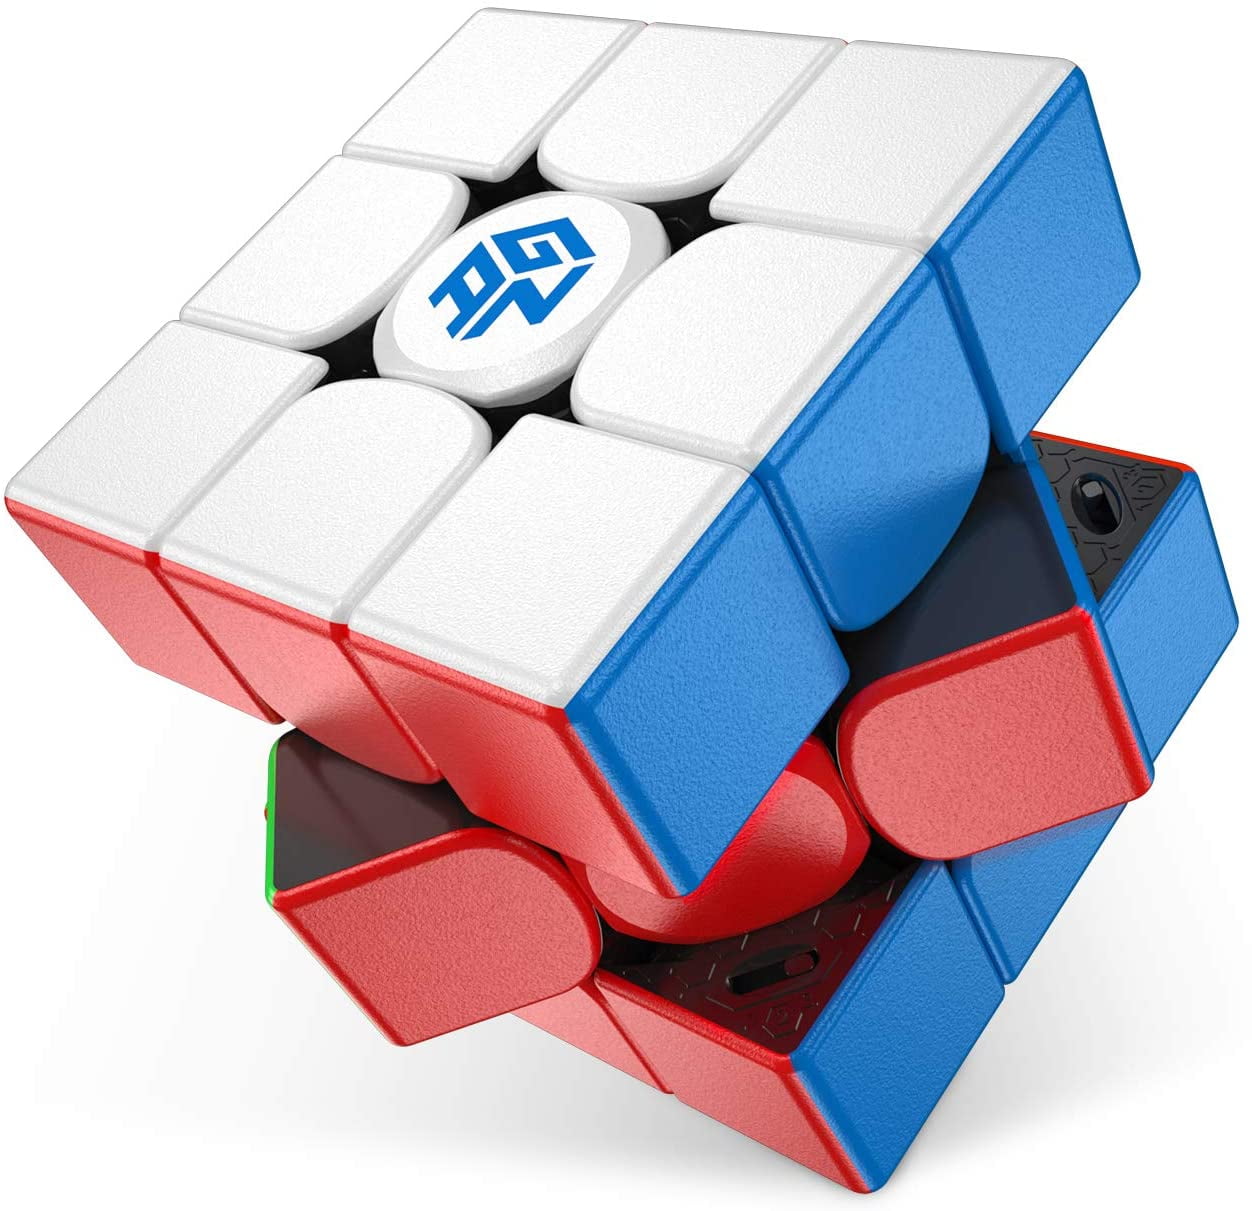 GAN 356i Play 3x3 Speed Cube Magnetic Bluetooth Smart Magic Cube Puzzle 